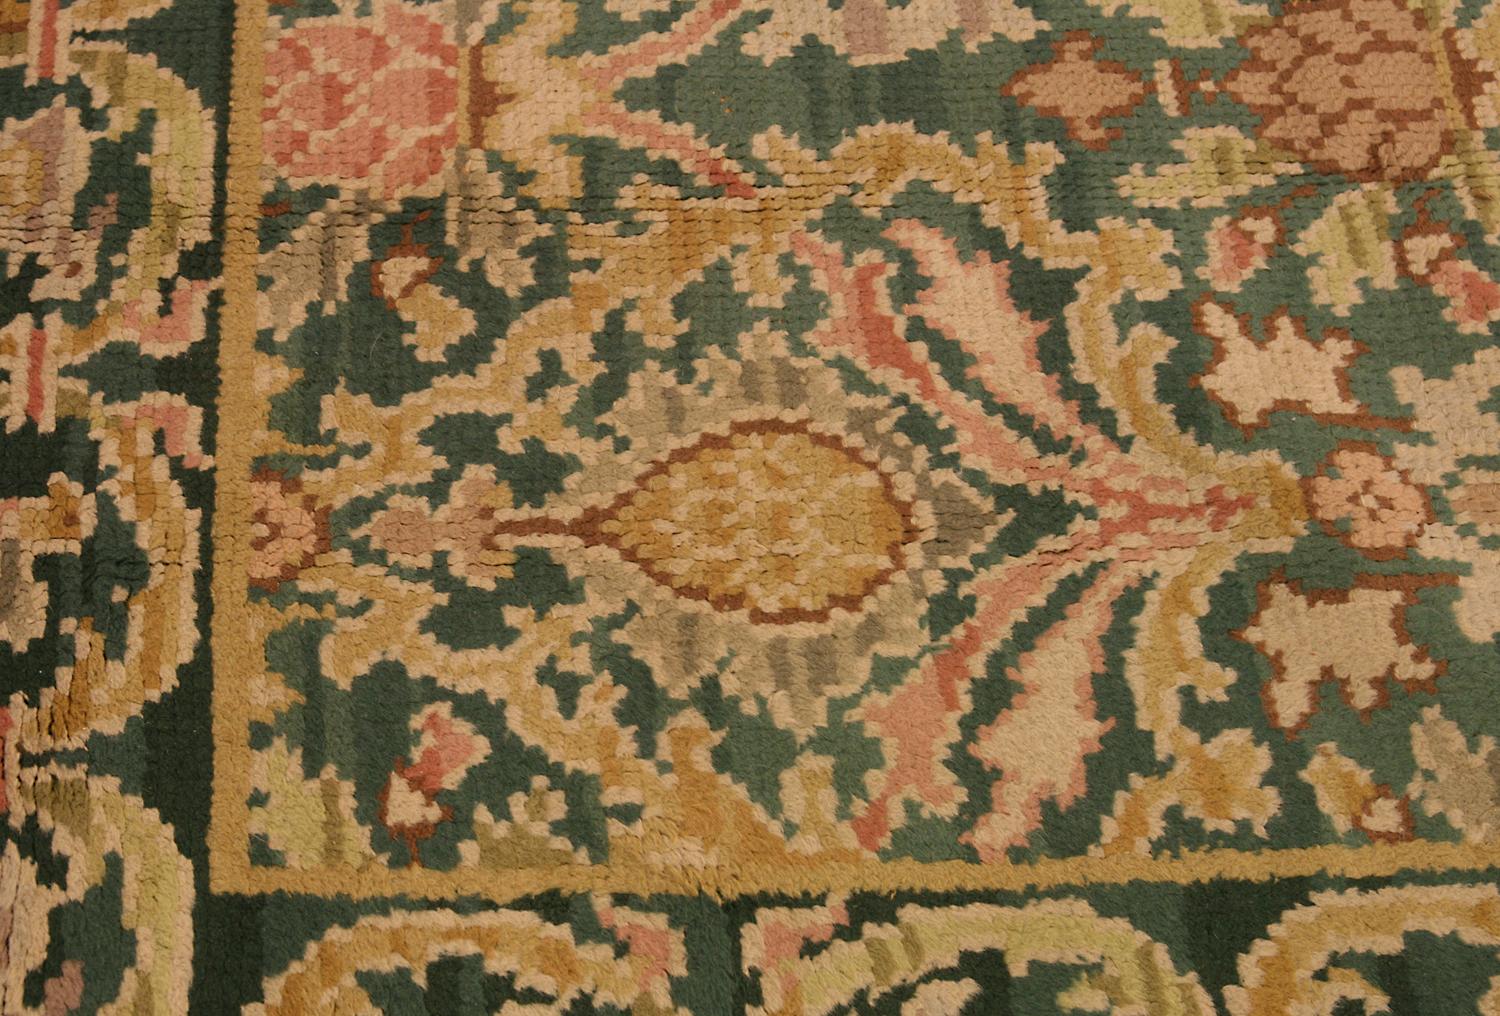 Other Antique European Donegal All-Over Green Field Wool Rug, ca. 1920